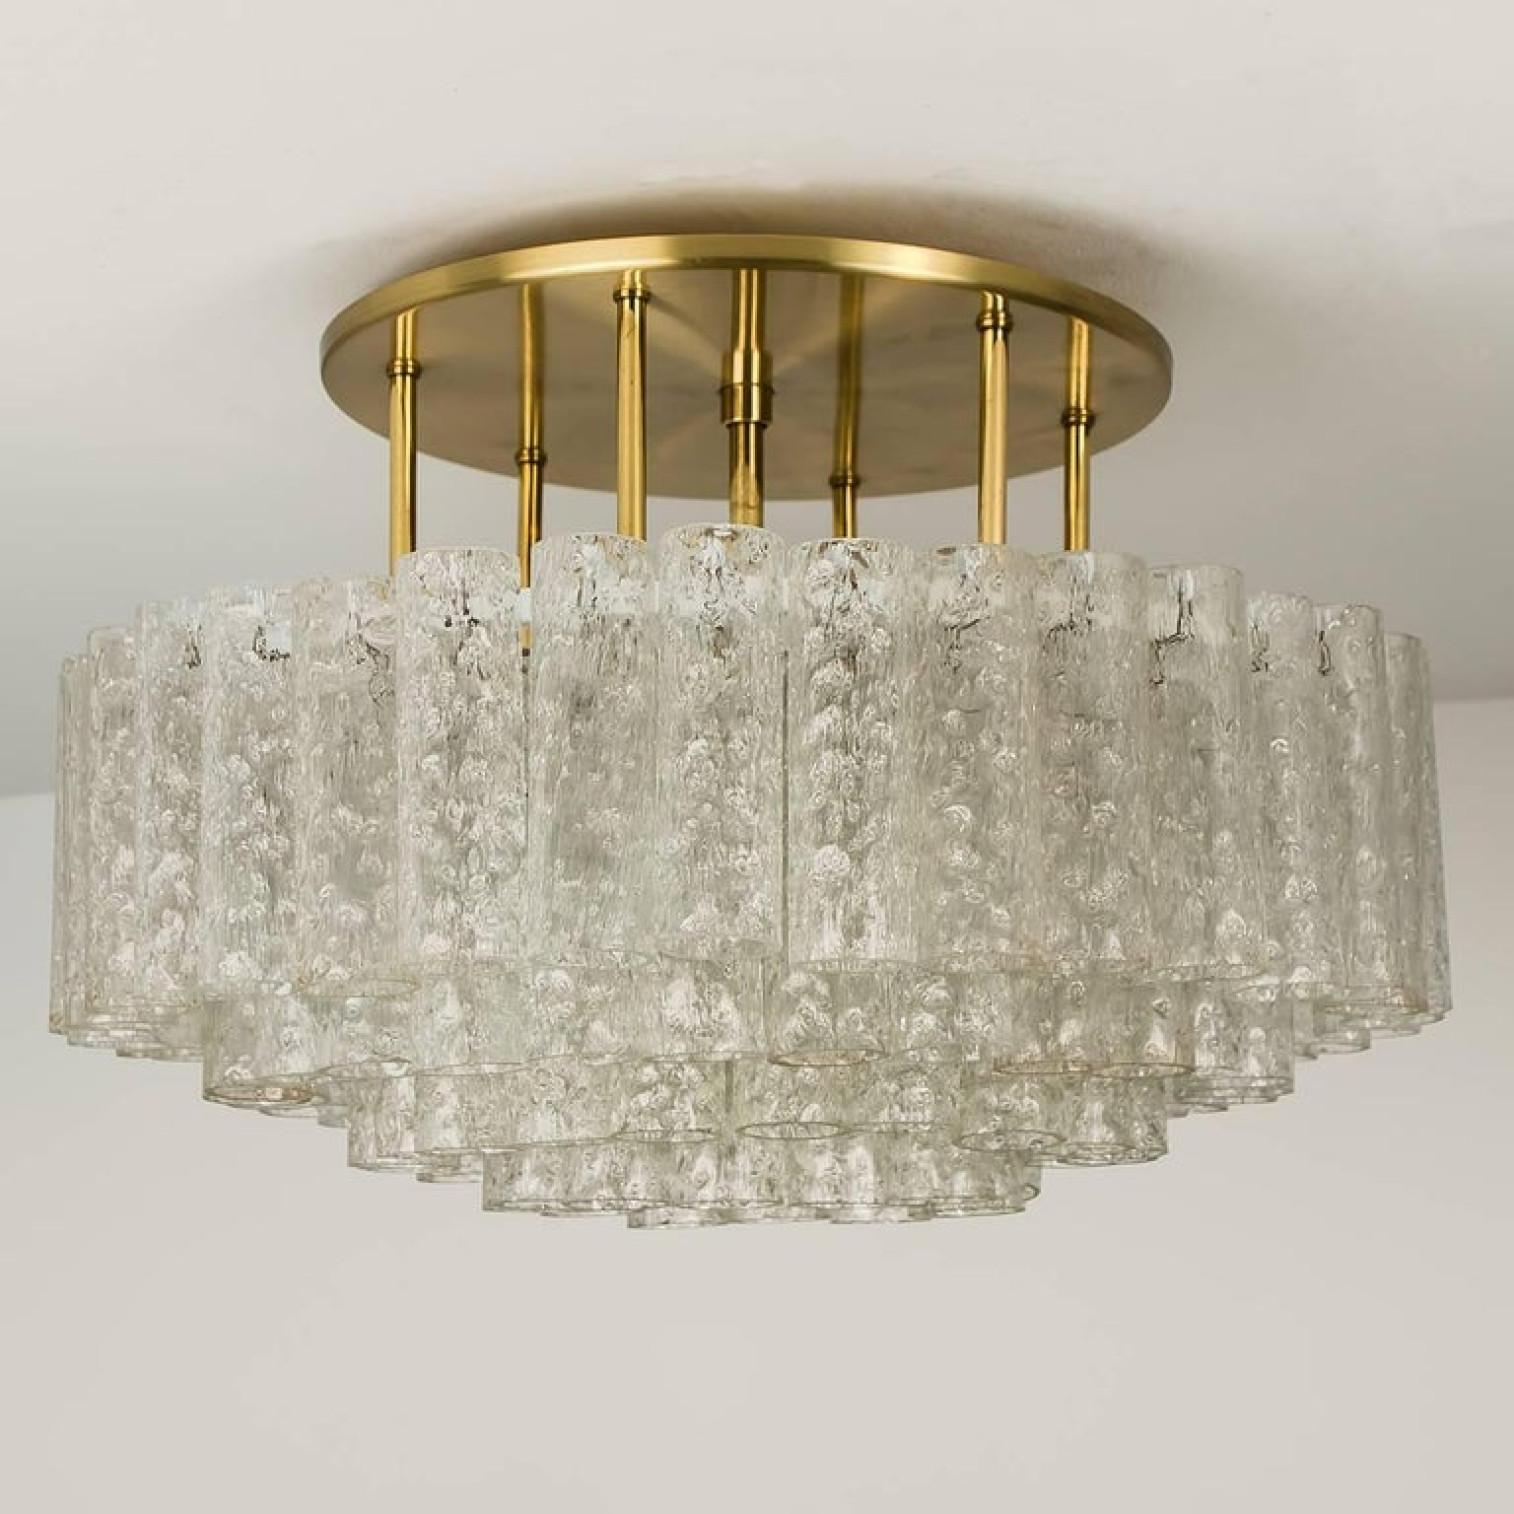 One of the Six Large Blown Glass Brass Flush Mount Light Fixtures by Doria 1960s For Sale 1